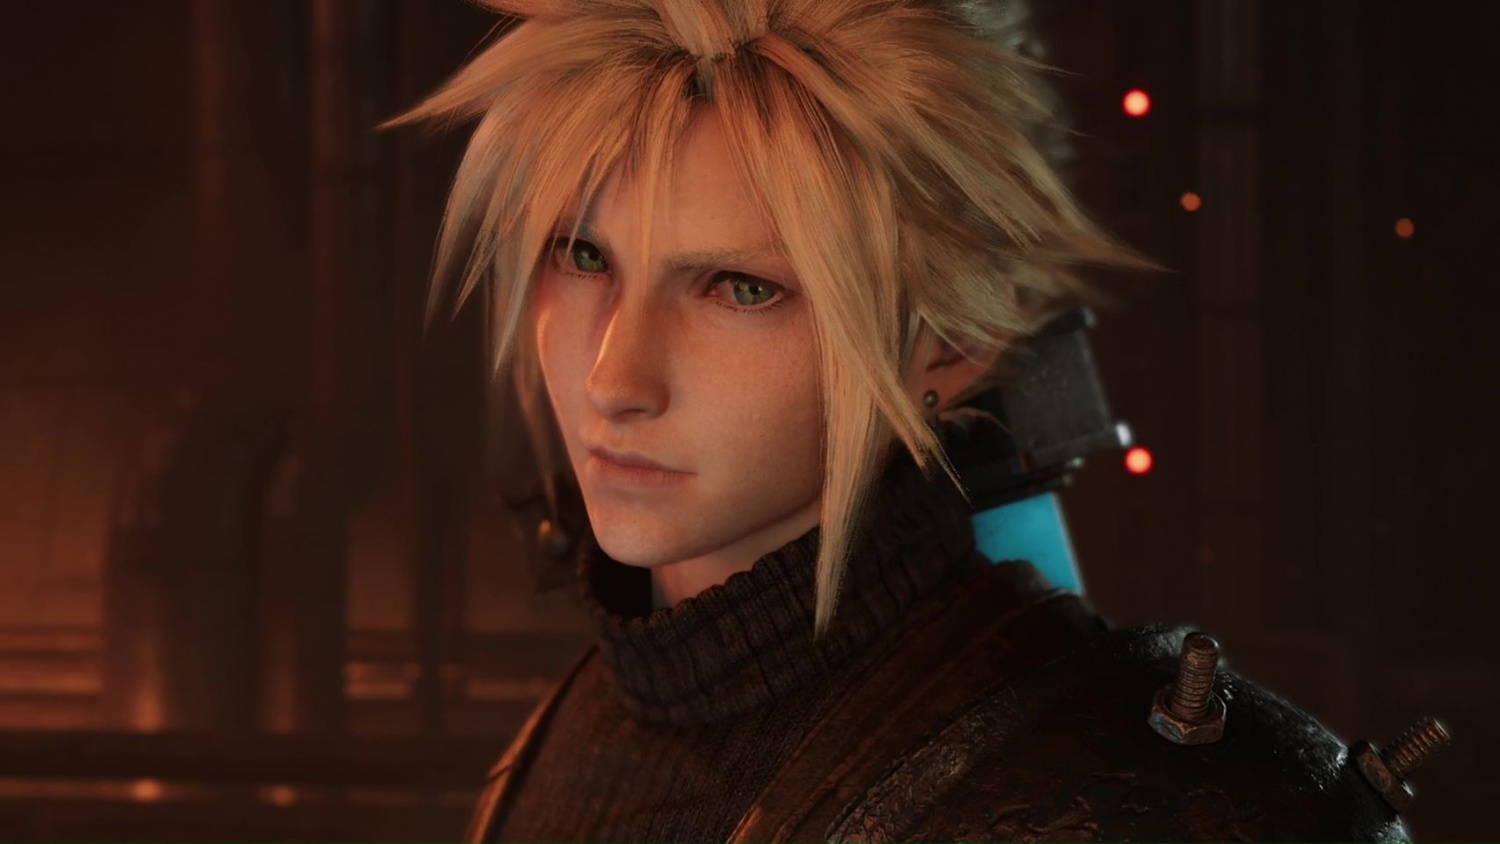 Final Fantasy 7 Remake's Episodic Approach Splinters Its Accessibility